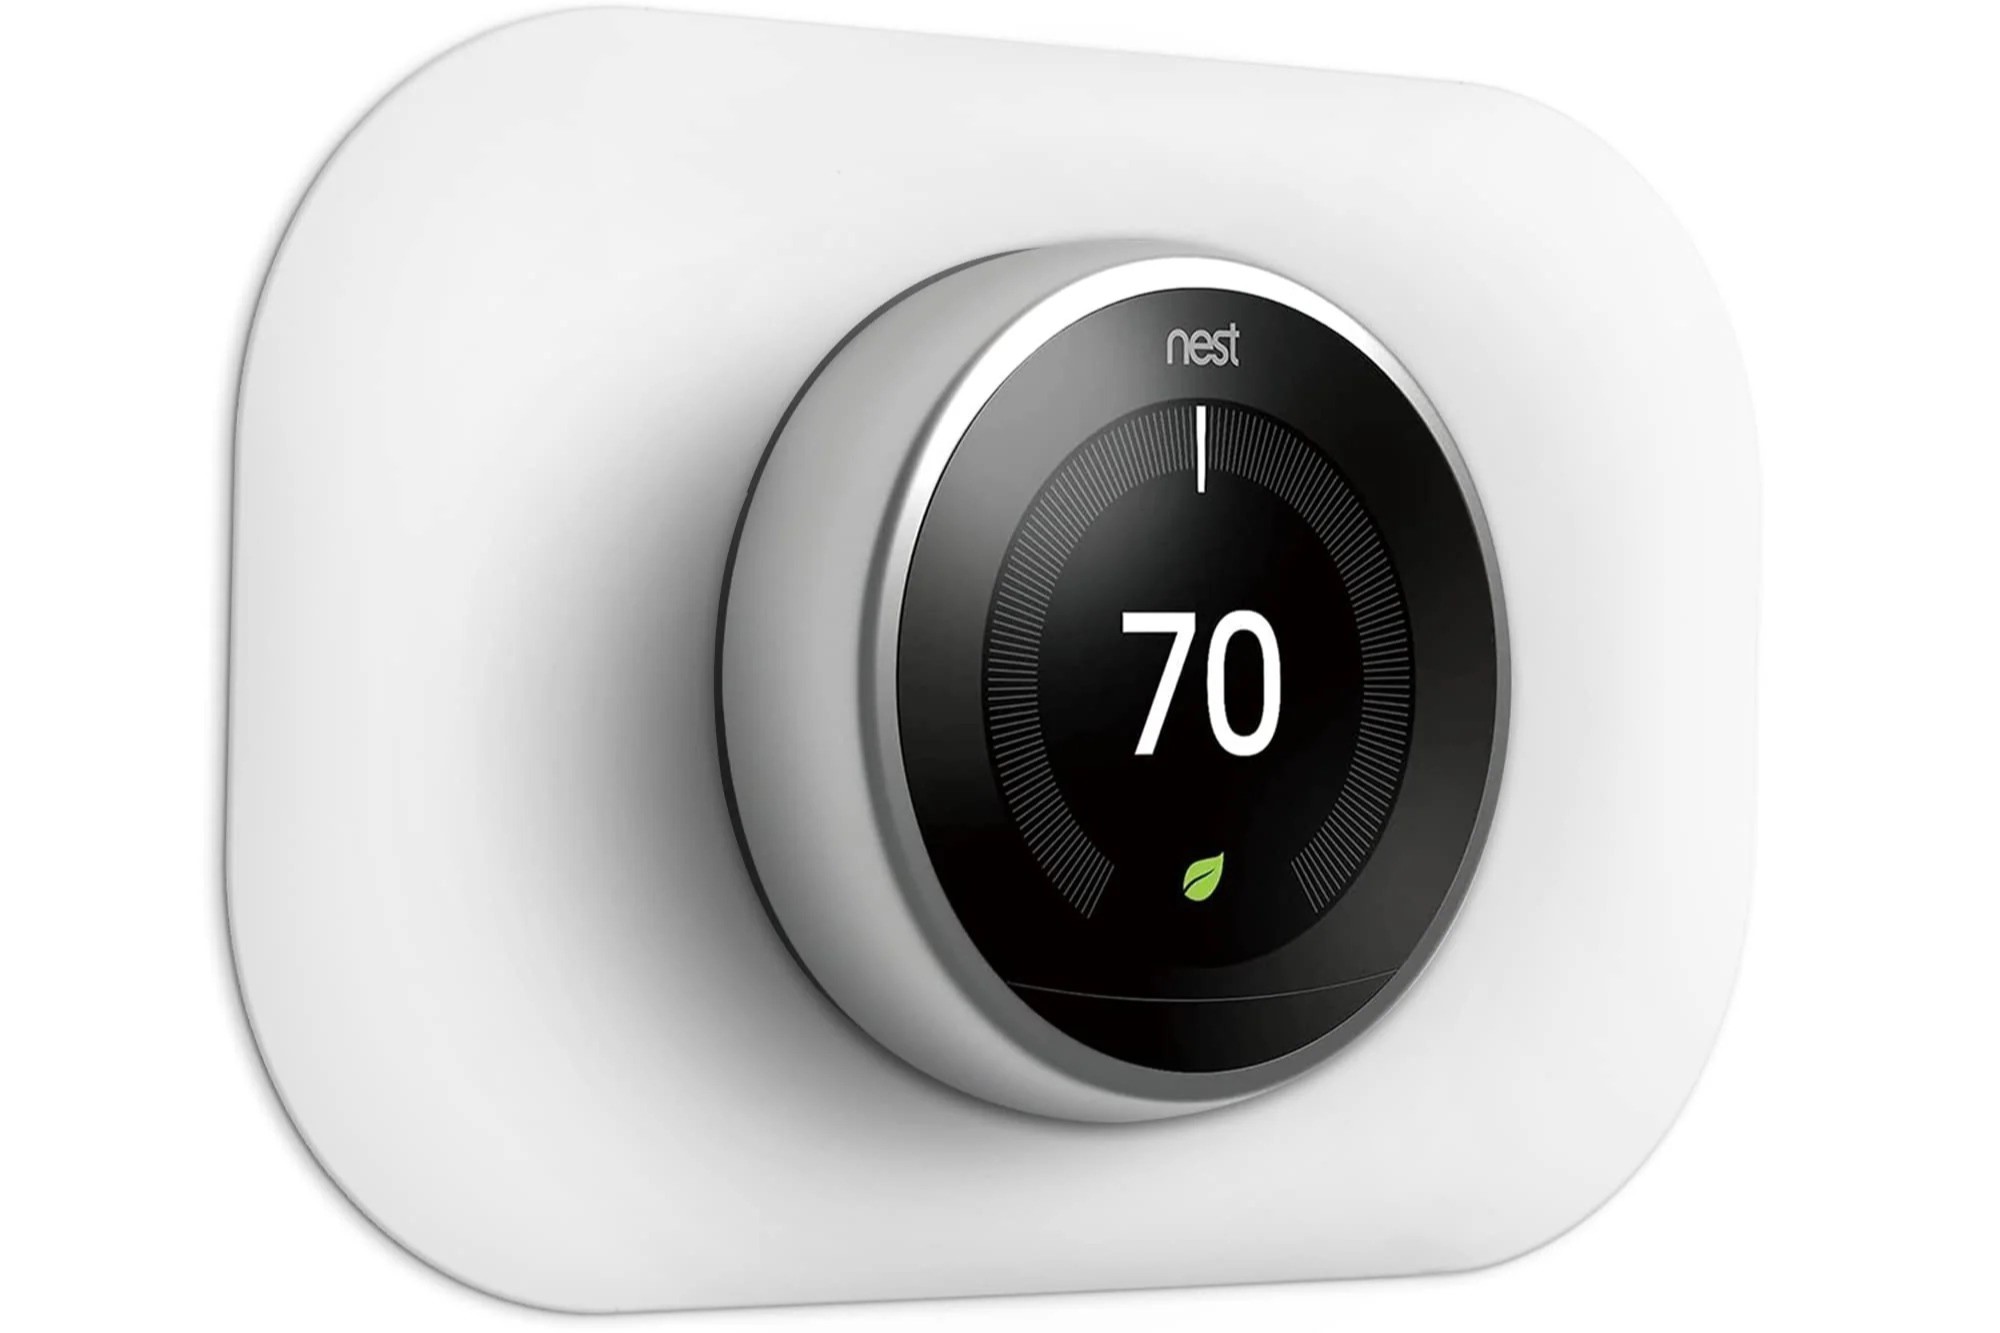 How To Install Nest Thermostat Trim Kit